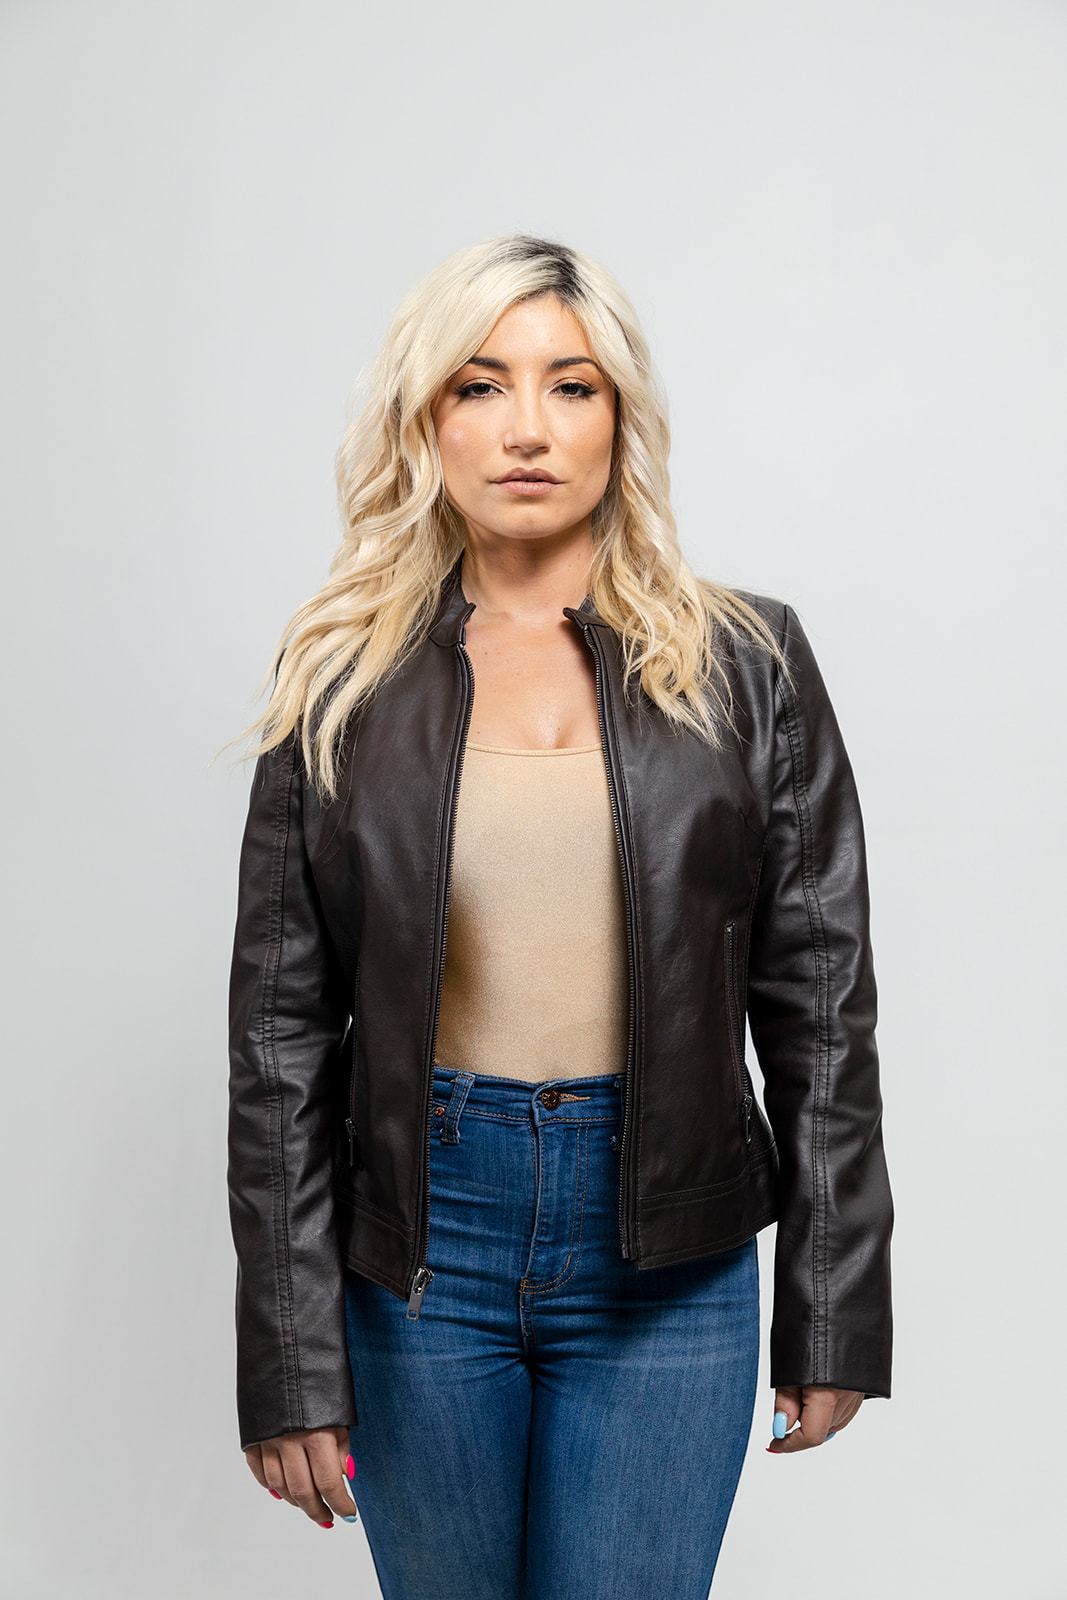 Beverly - Women's Vegan Faux Leather/Perforated Jacket